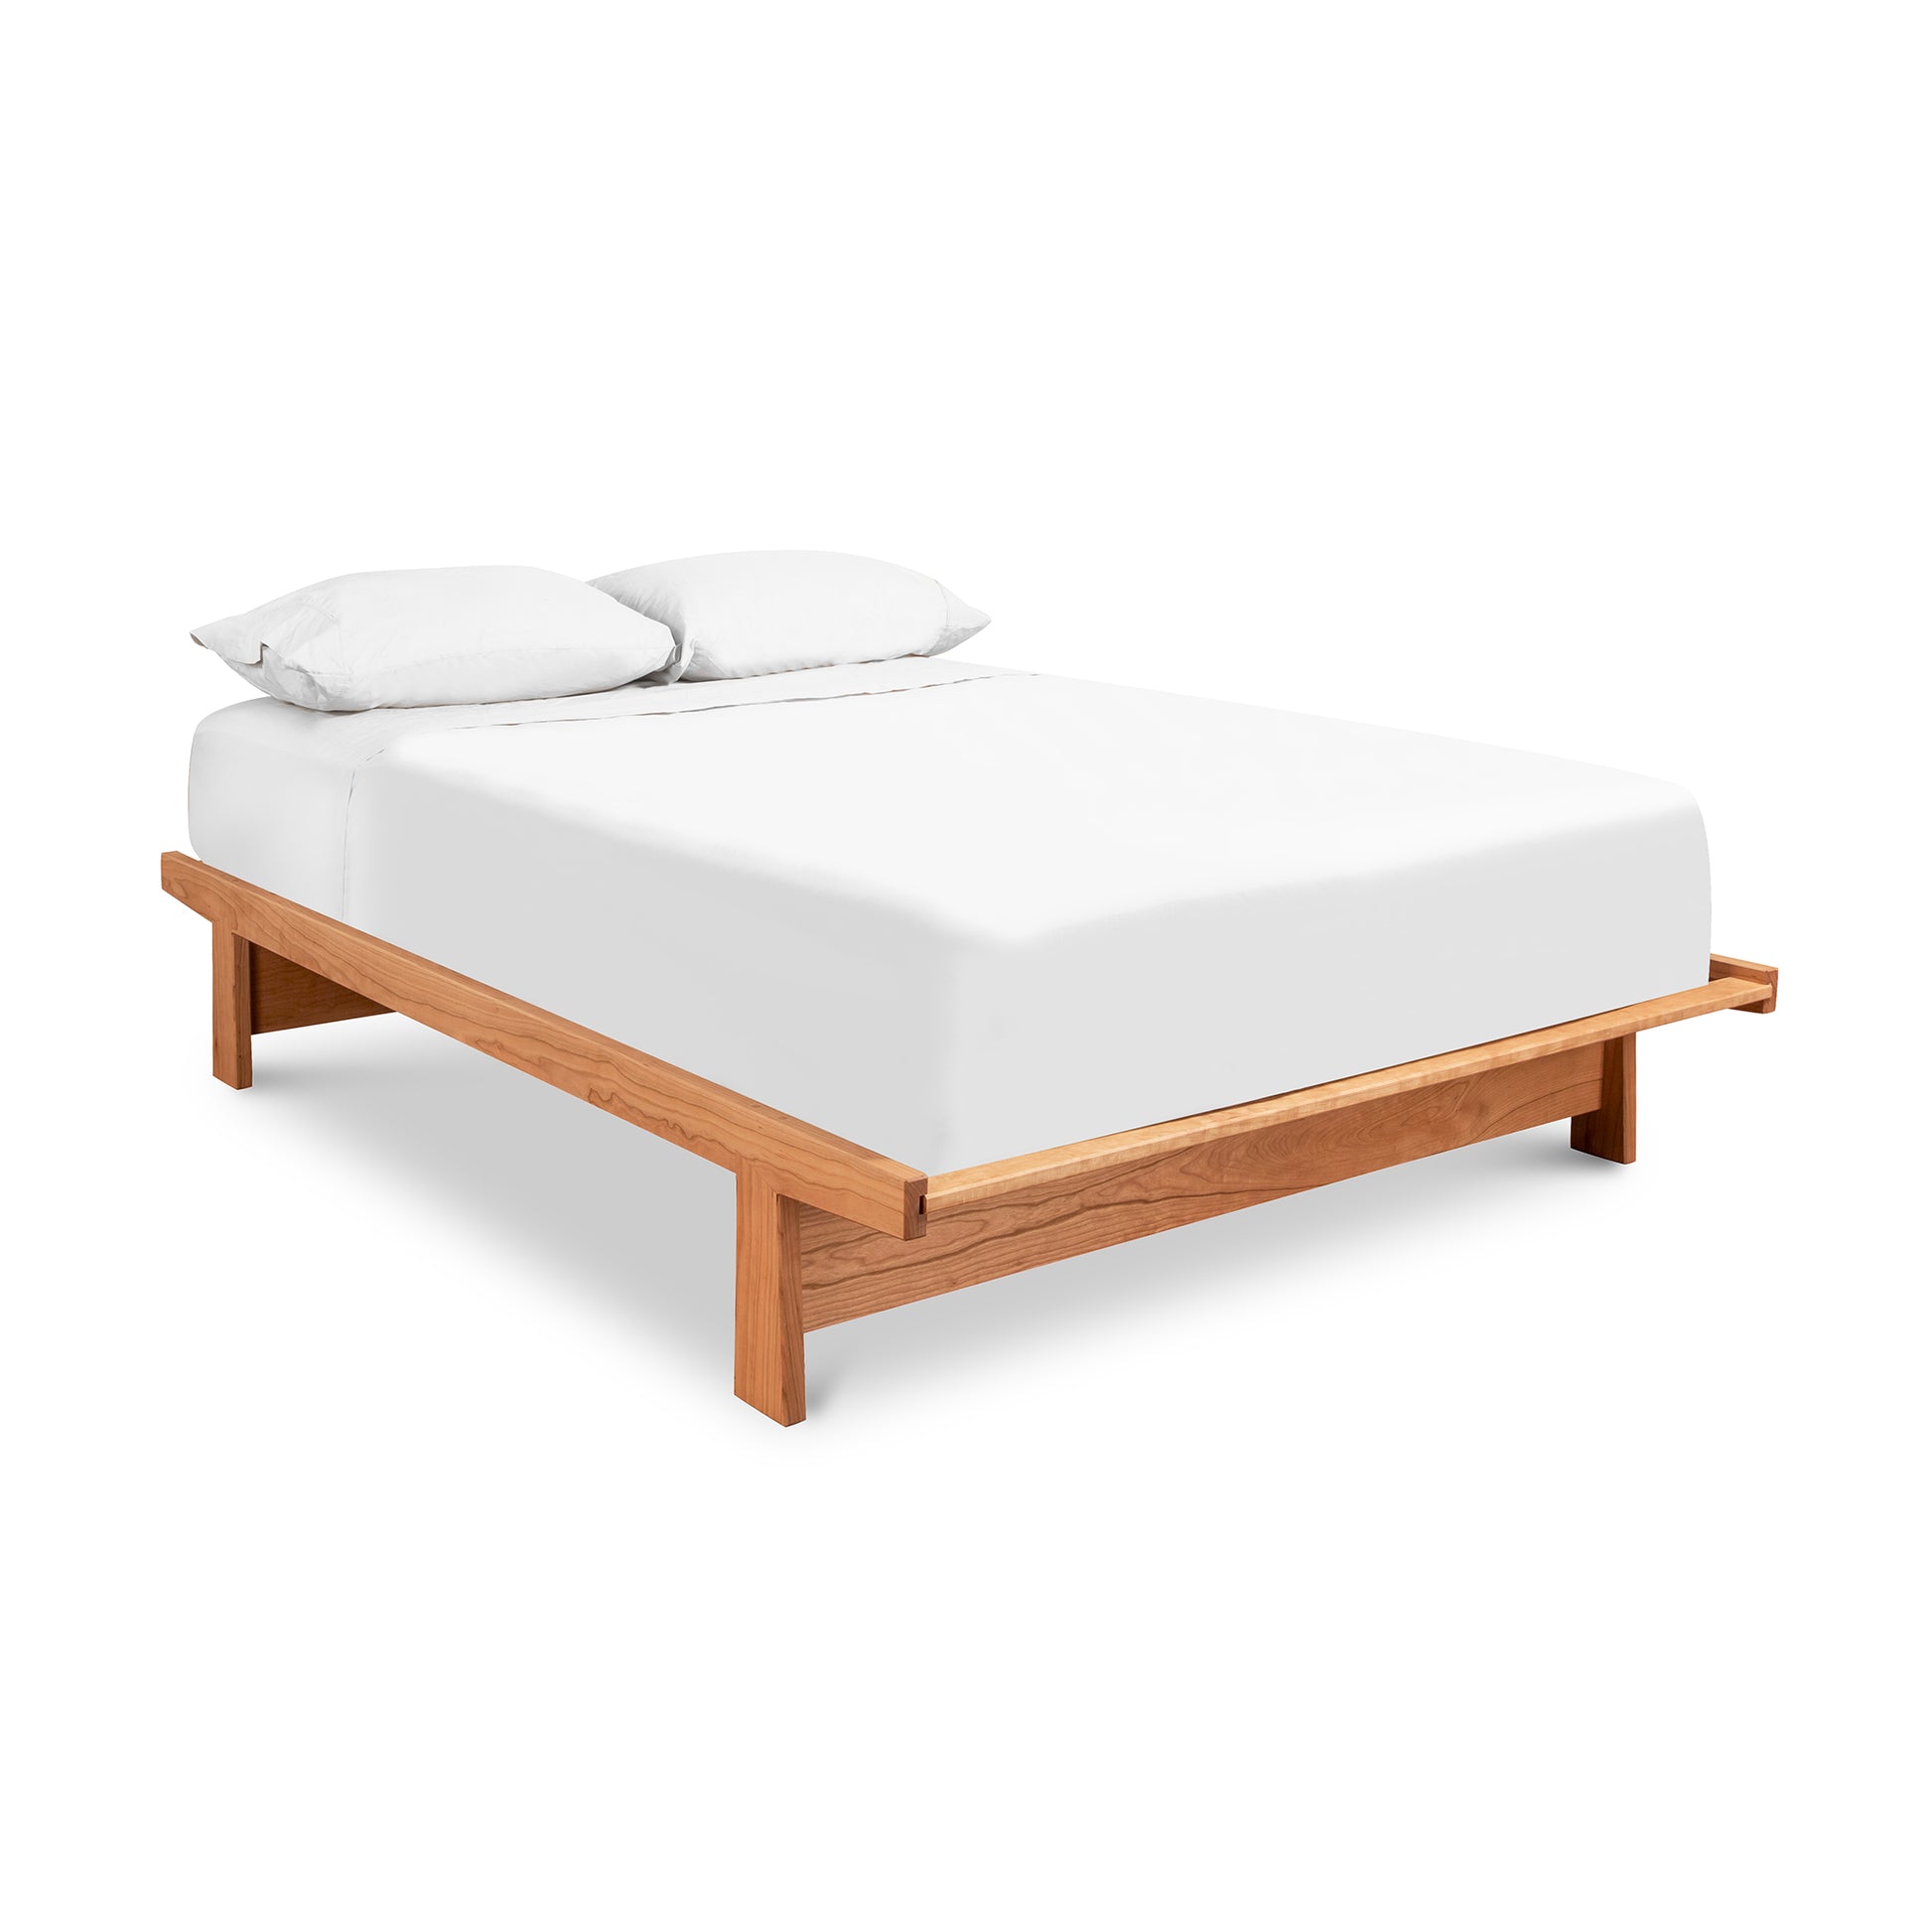 A Cherry Moon Dovetail Platform Bed from Maple Corner Woodworks, featuring a white mattress and two pillows. The frame and legs, crafted from solid sustainably harvested woods, appear to be made of light-colored wood with an eco-friendly oil.